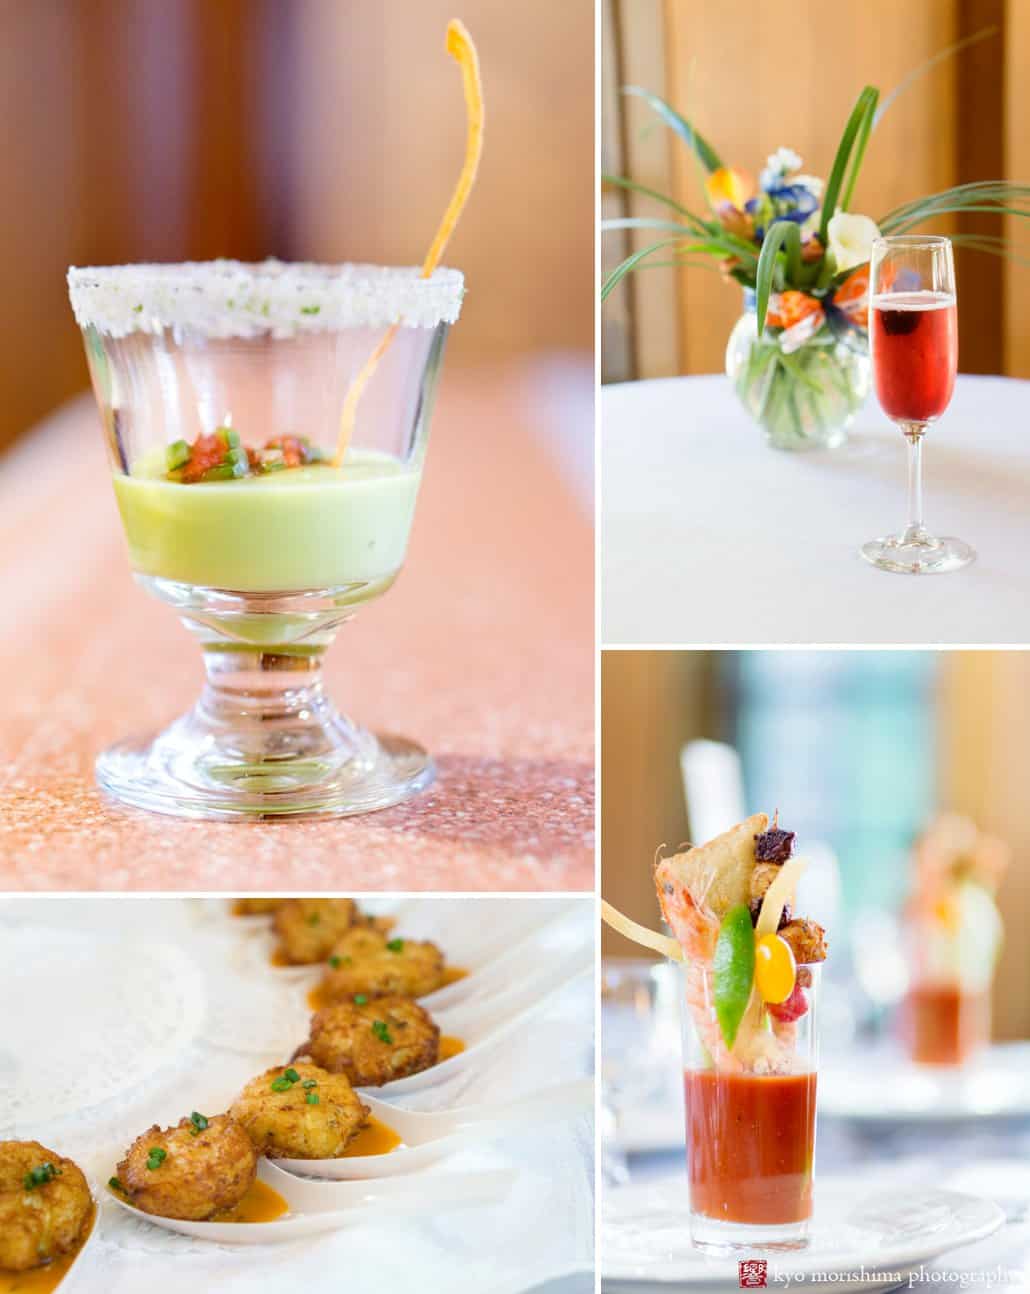 Princeton Cap and Gown Club catering's delicious food and drink for a summer wedding, photographed by Kyo Morishima